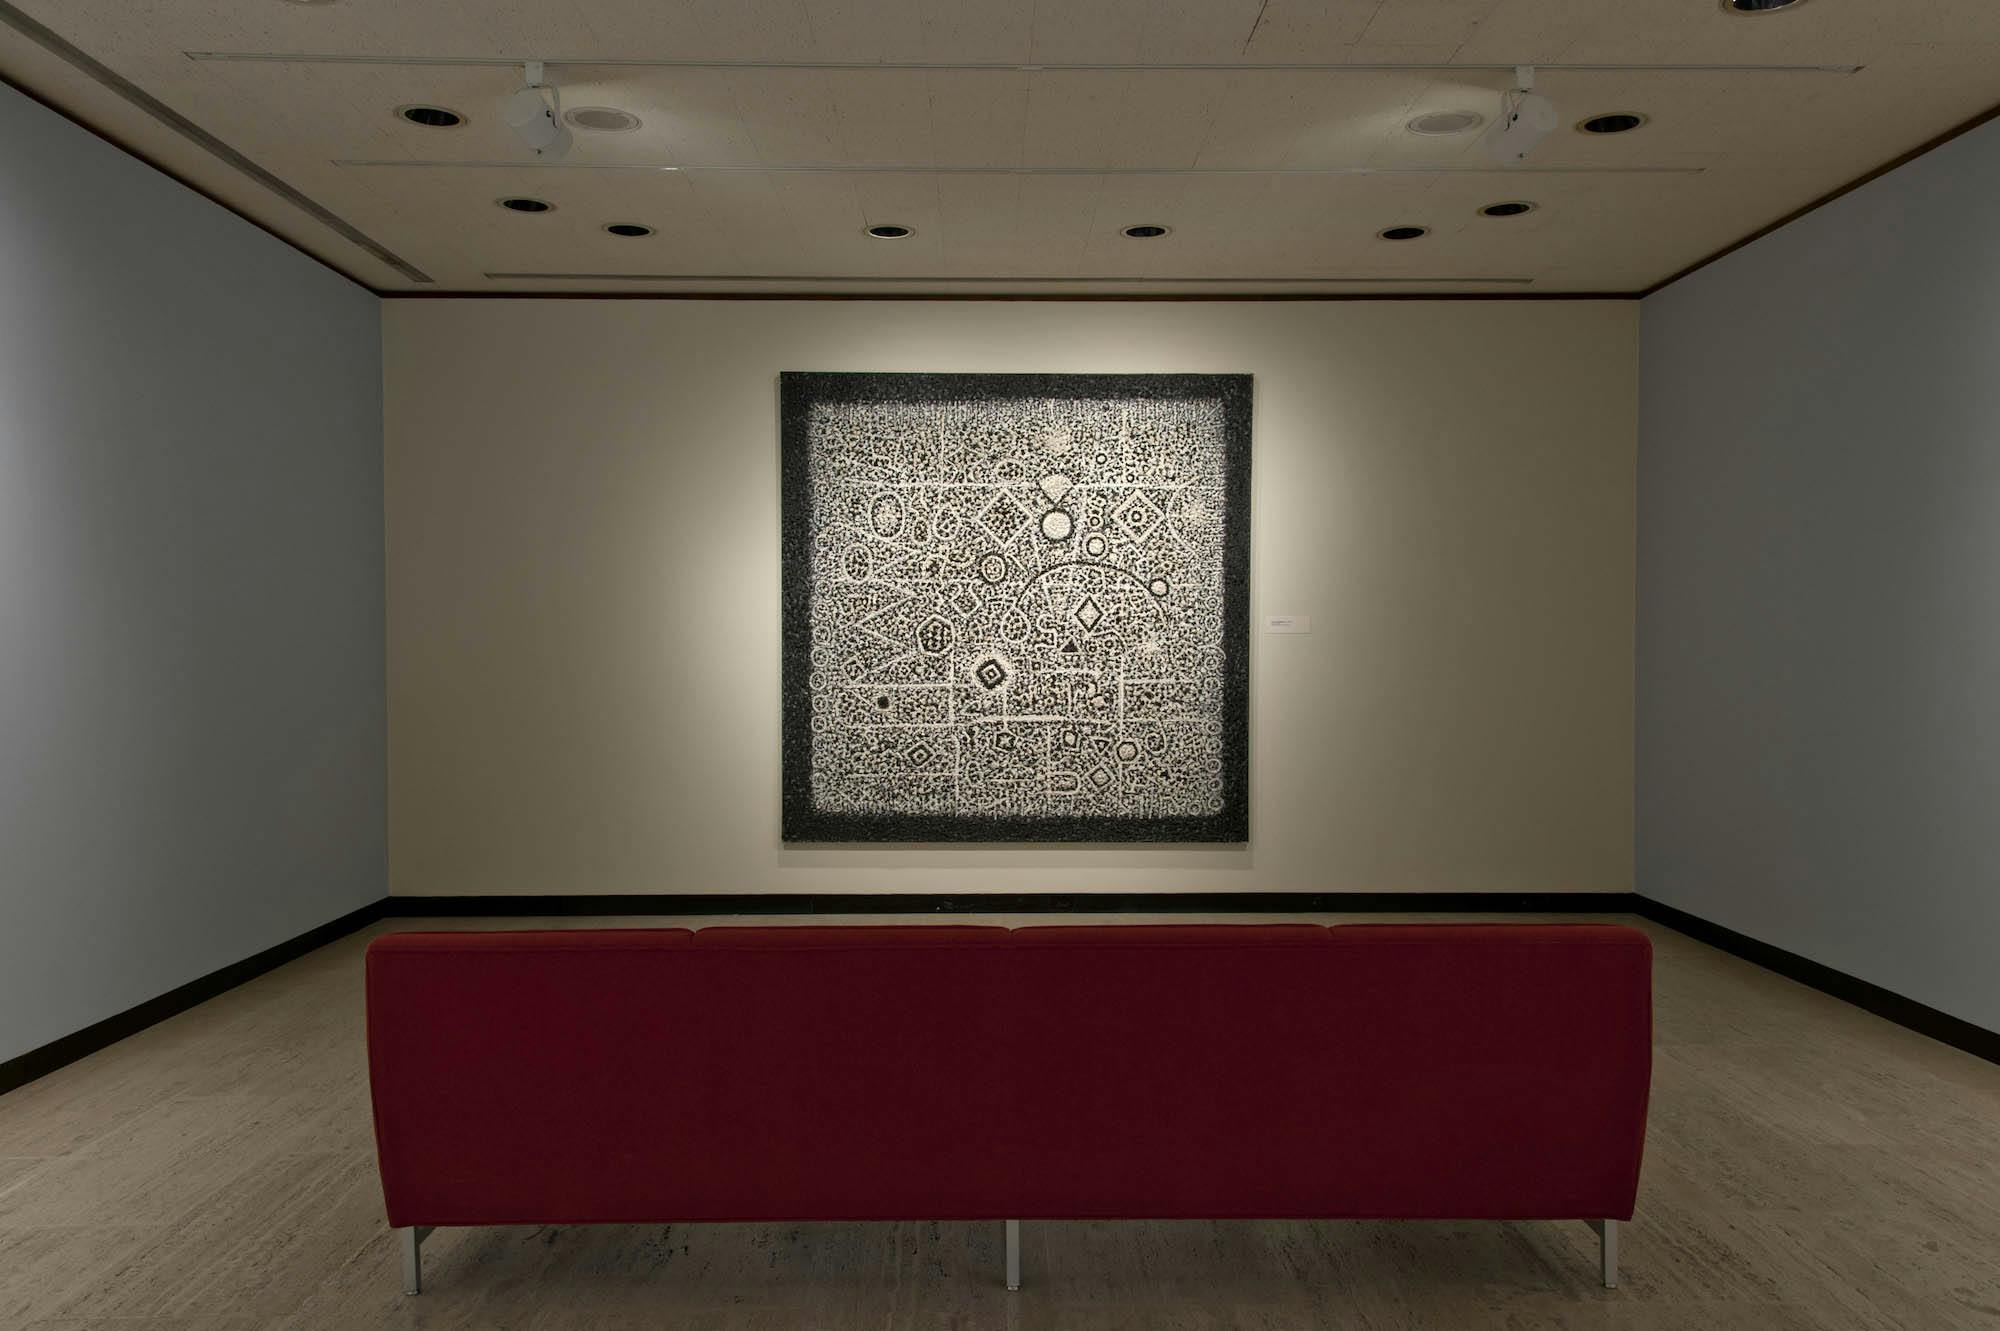 Installation view, Absence/Presence: Richard Pousette-Dart as Photographer, Munson-Williams-Proctor Arts Institute, Utica, NY, 2014 – 2015. – The Richard Pousette-Dart Foundation